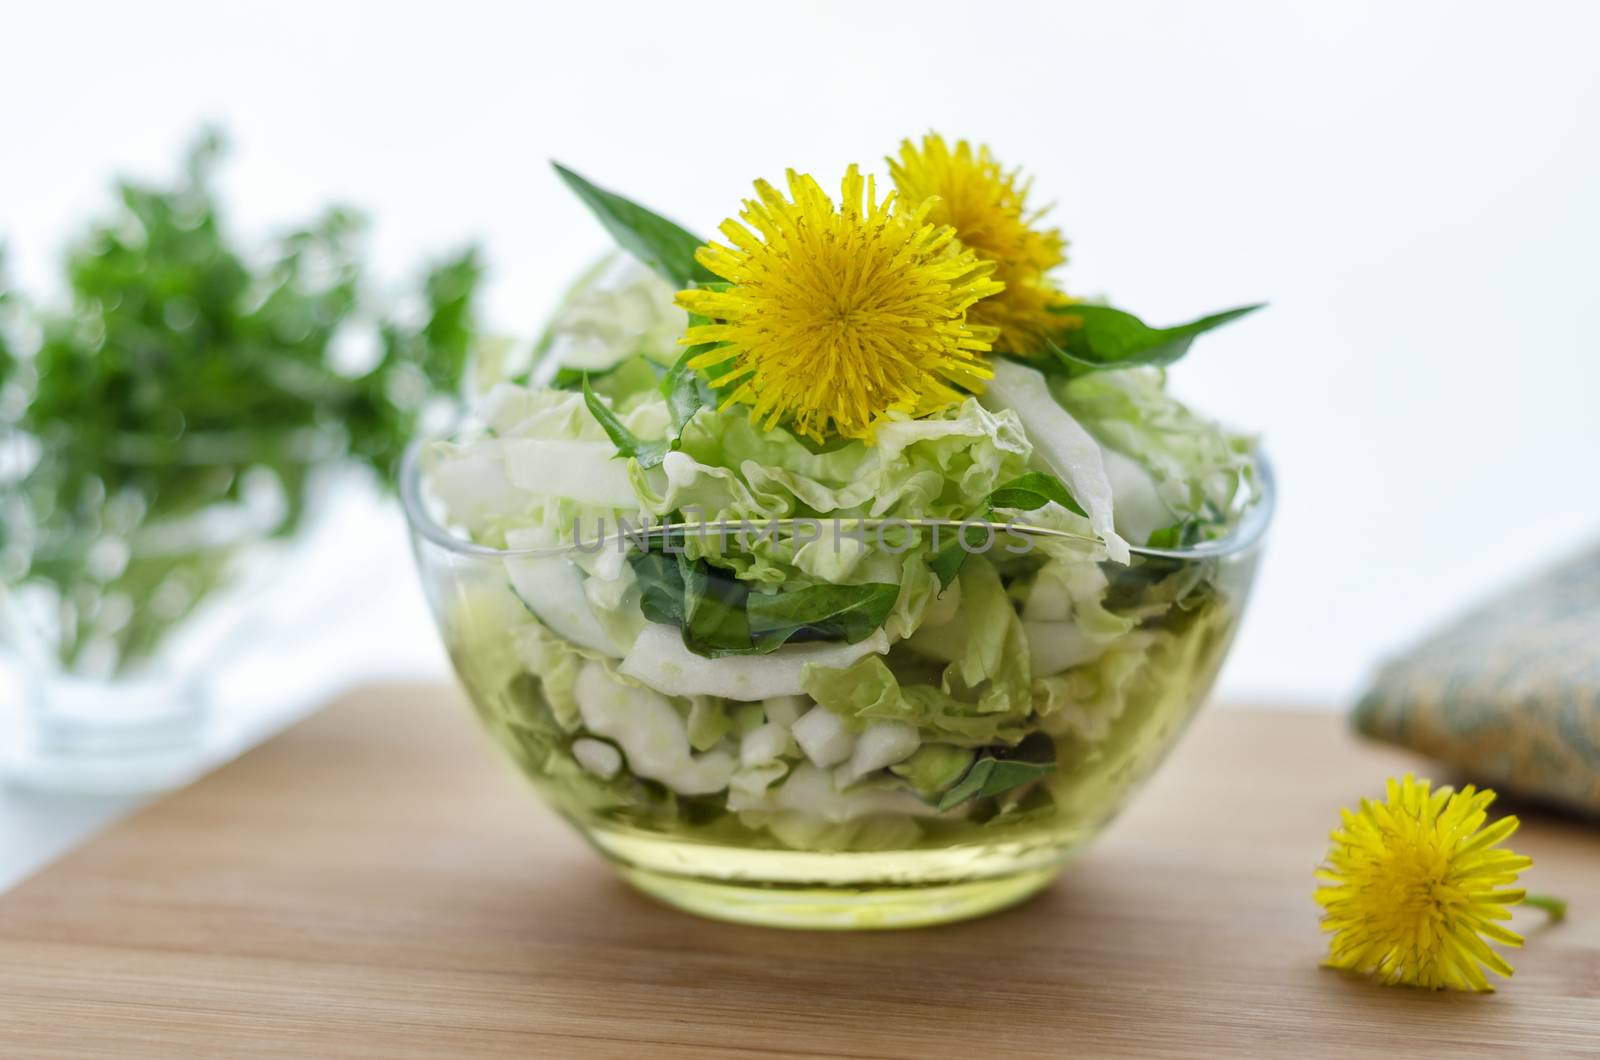 Salad from Chinese cabbage and dandelion leaves, on the table. Morning light, bokeh, decorated with flowers of the dandelion greens in the background and a napkin.